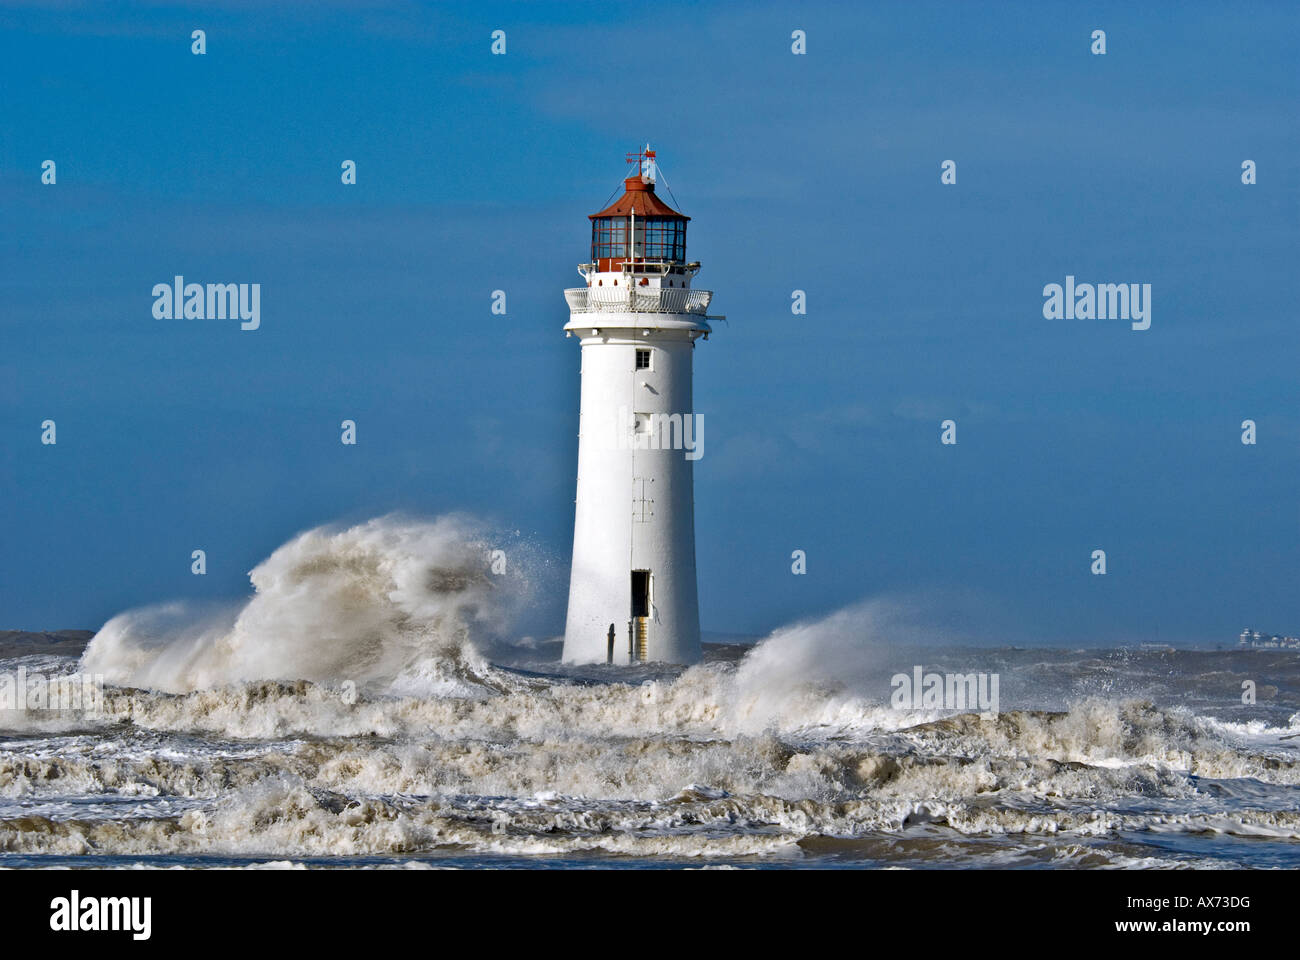 Pesce persico Rock lighthouse New Brighton storm pic in onde Foto Stock